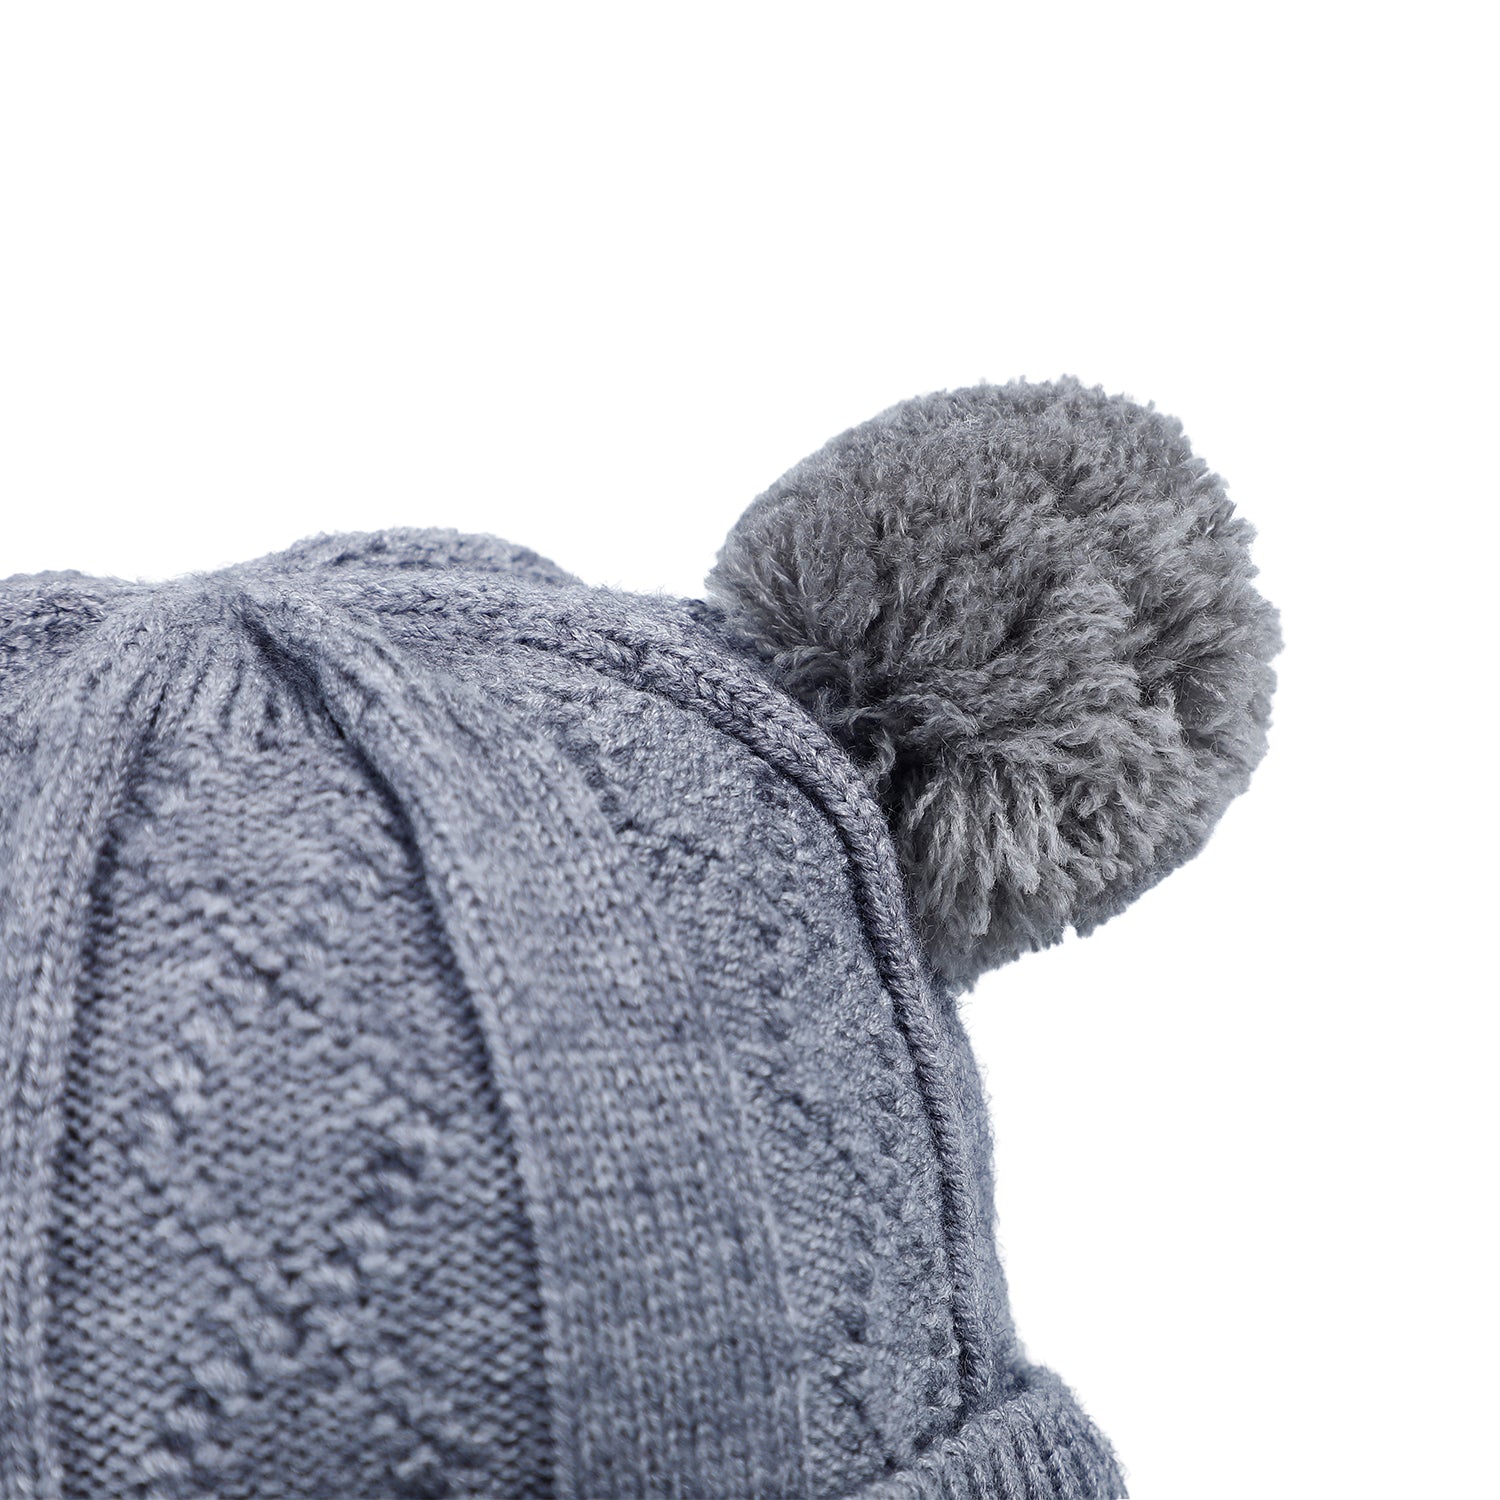 Knit Woollen Cap With Tie For Ear Cover Starry Pom Pom Grey - Baby Moo